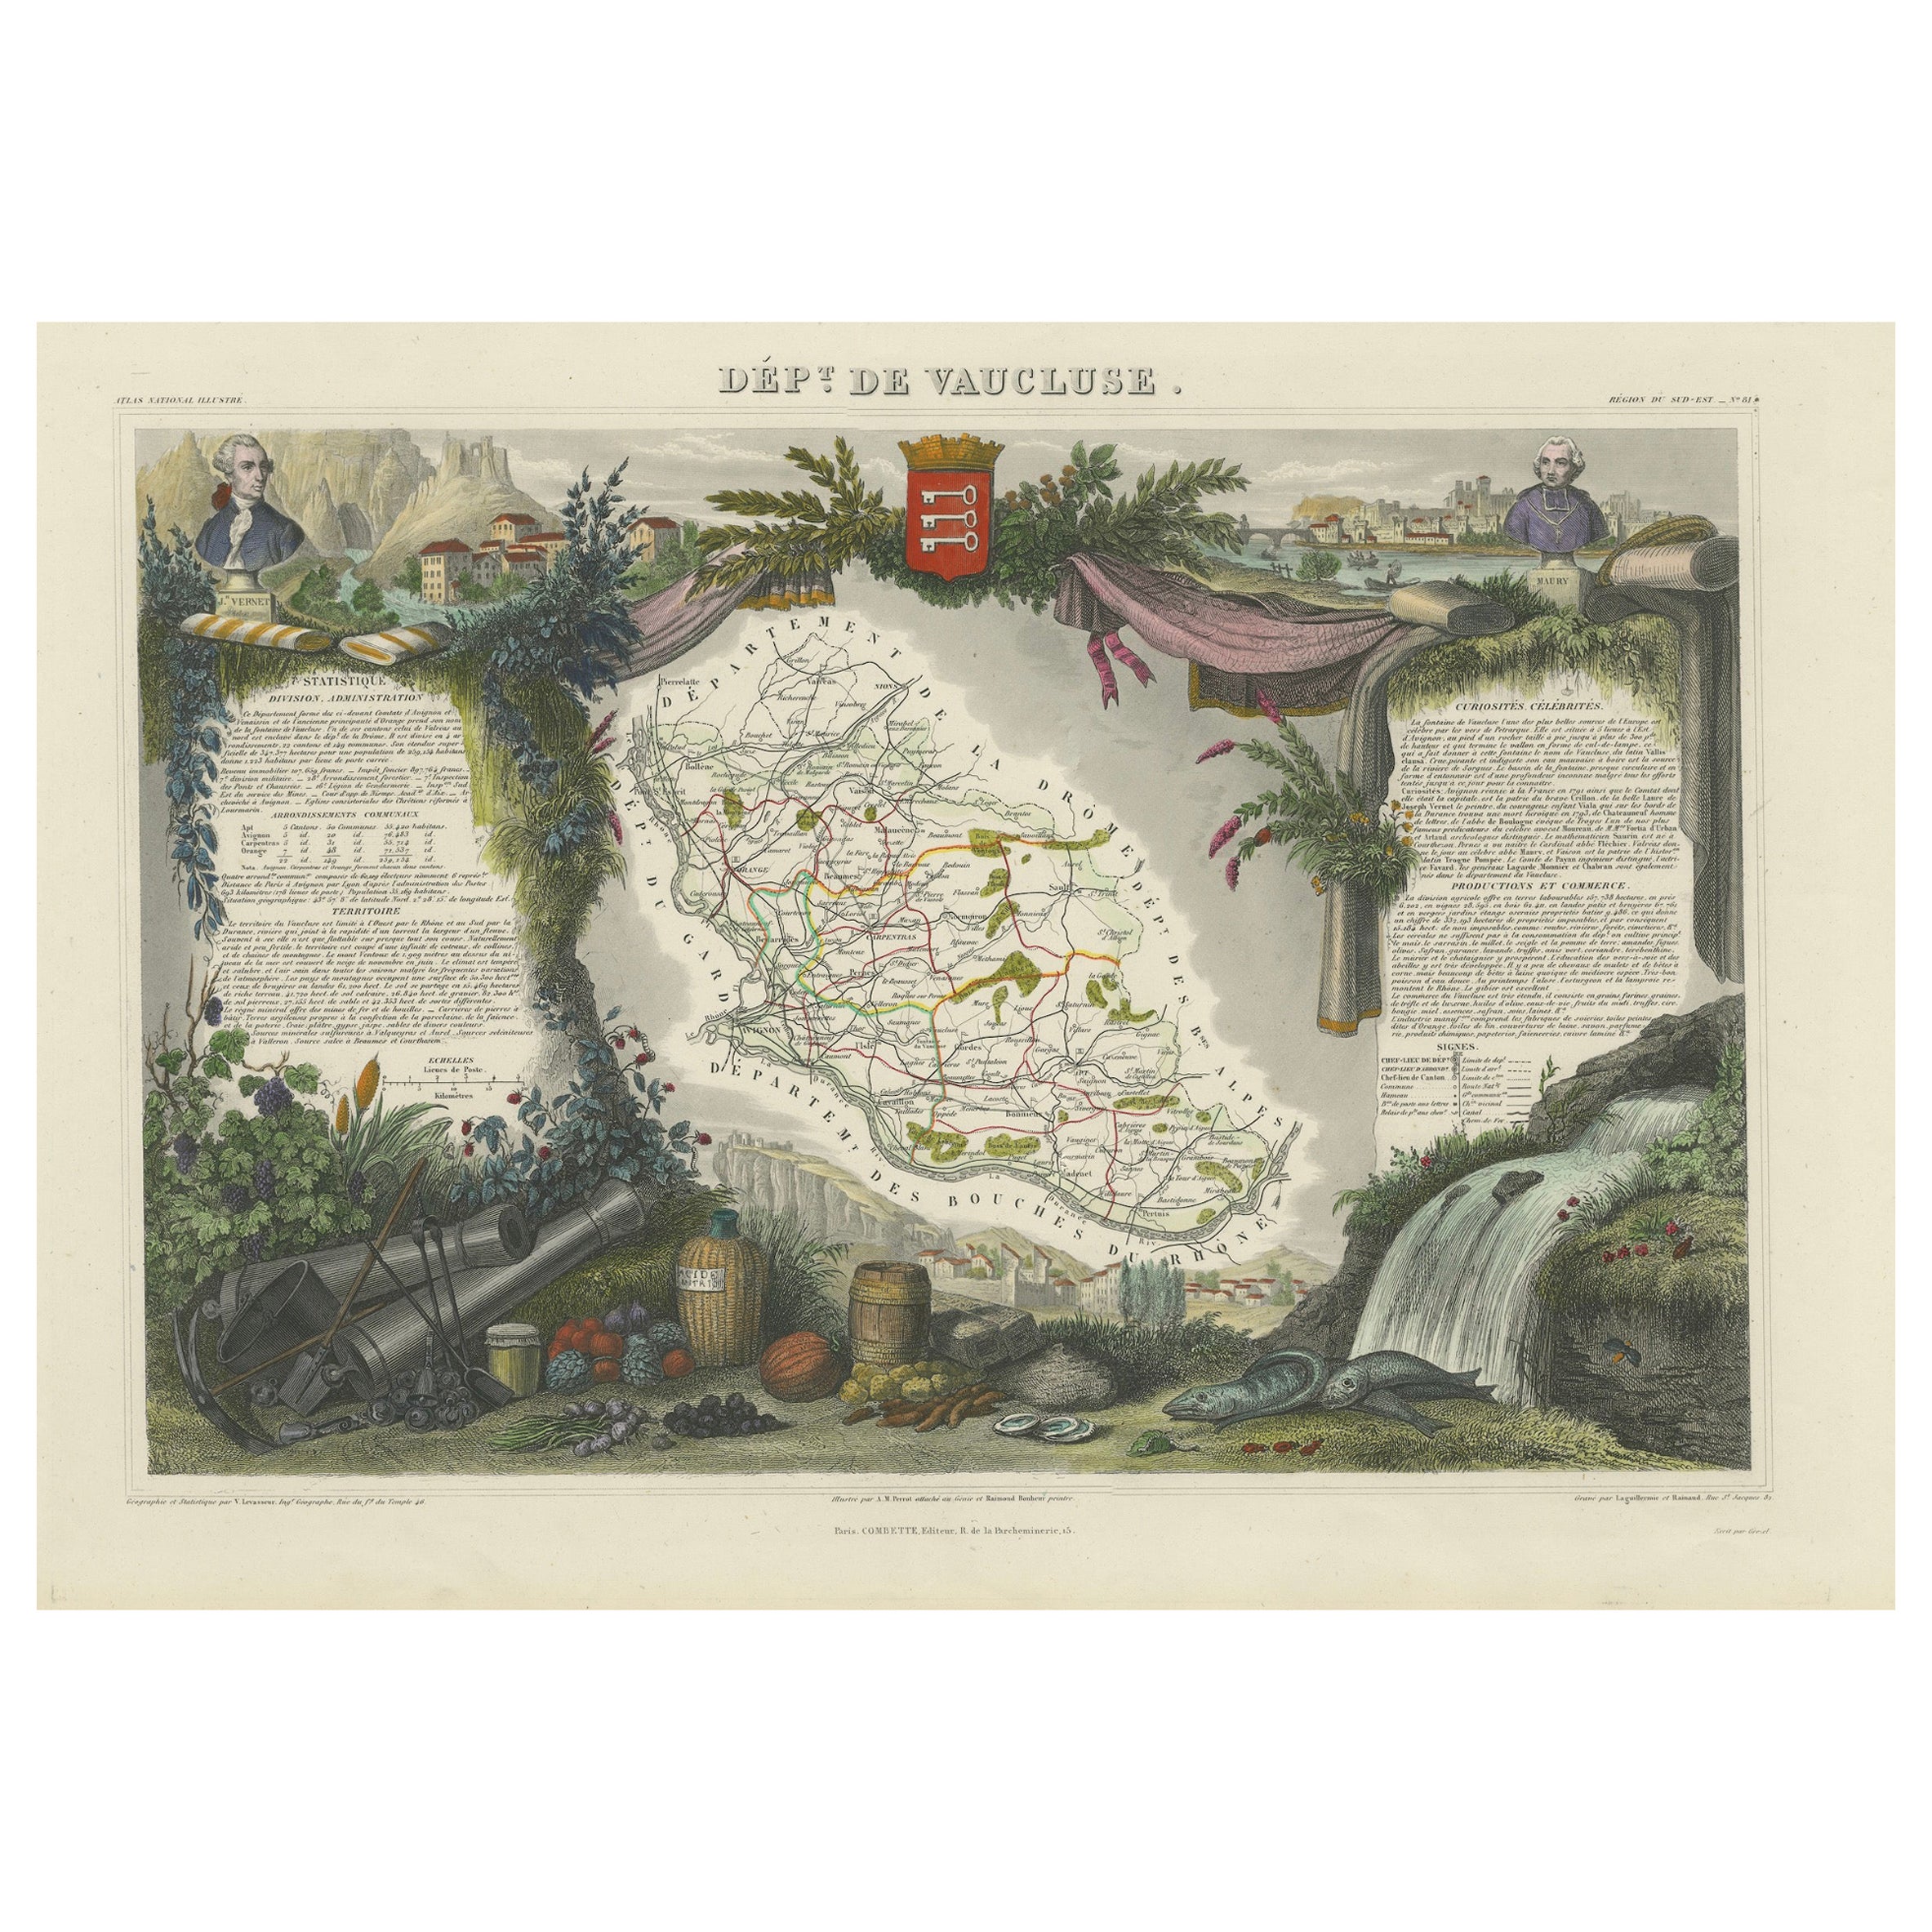 Old Map of Vaucluse, France: A Cartographic Celebration of Viticulture, 1852 For Sale